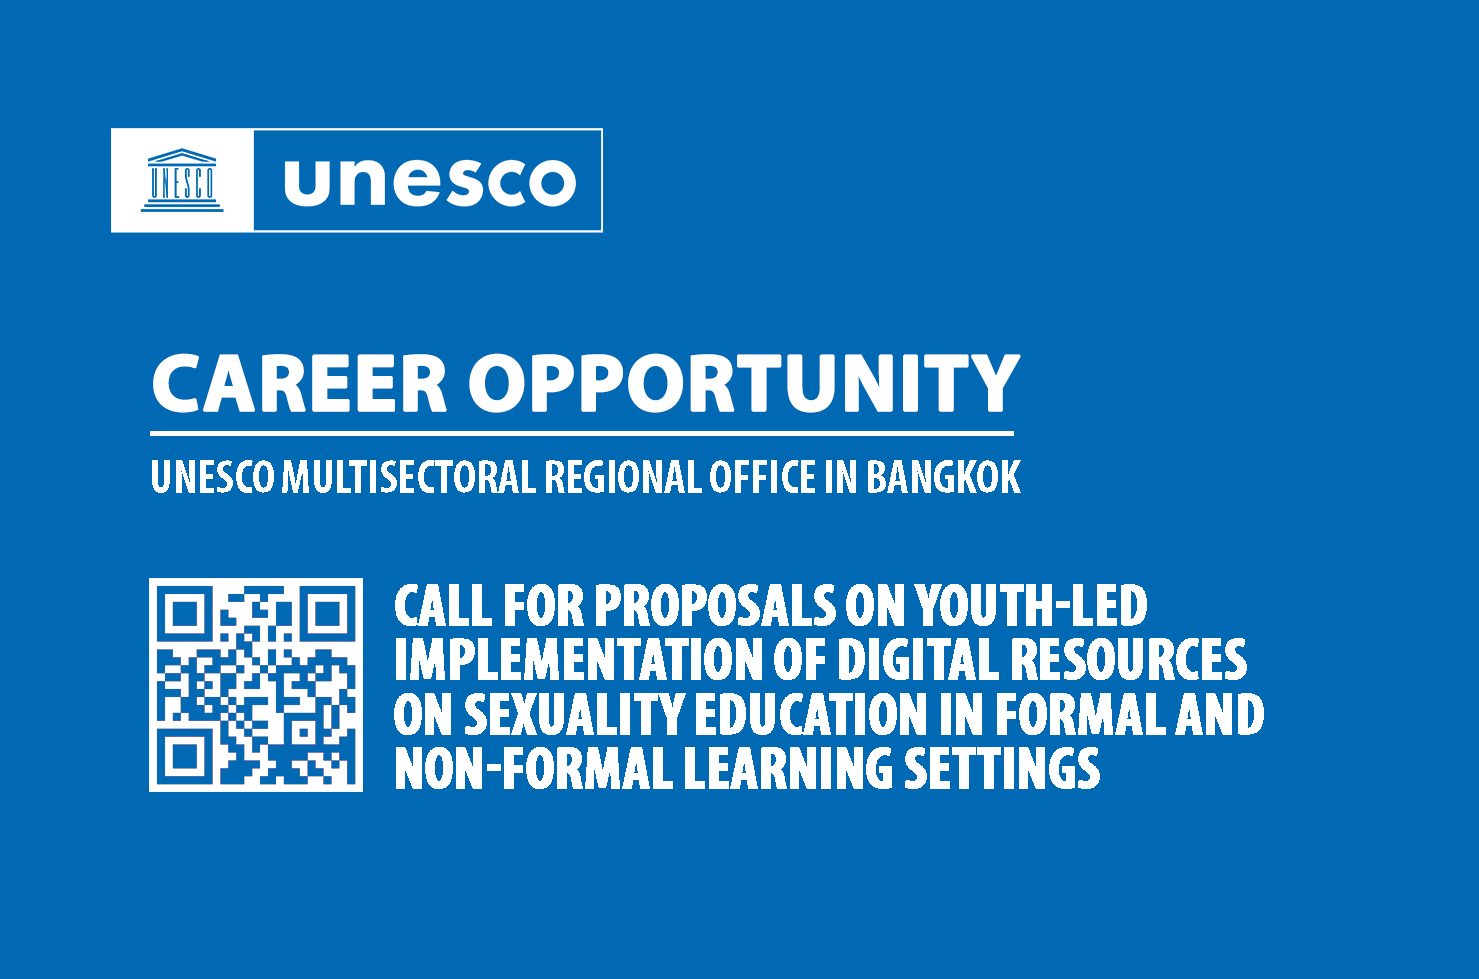 Call for Proposals on Youth-led implementation of digital resources on sexuality education in formal and non-formal learning settings